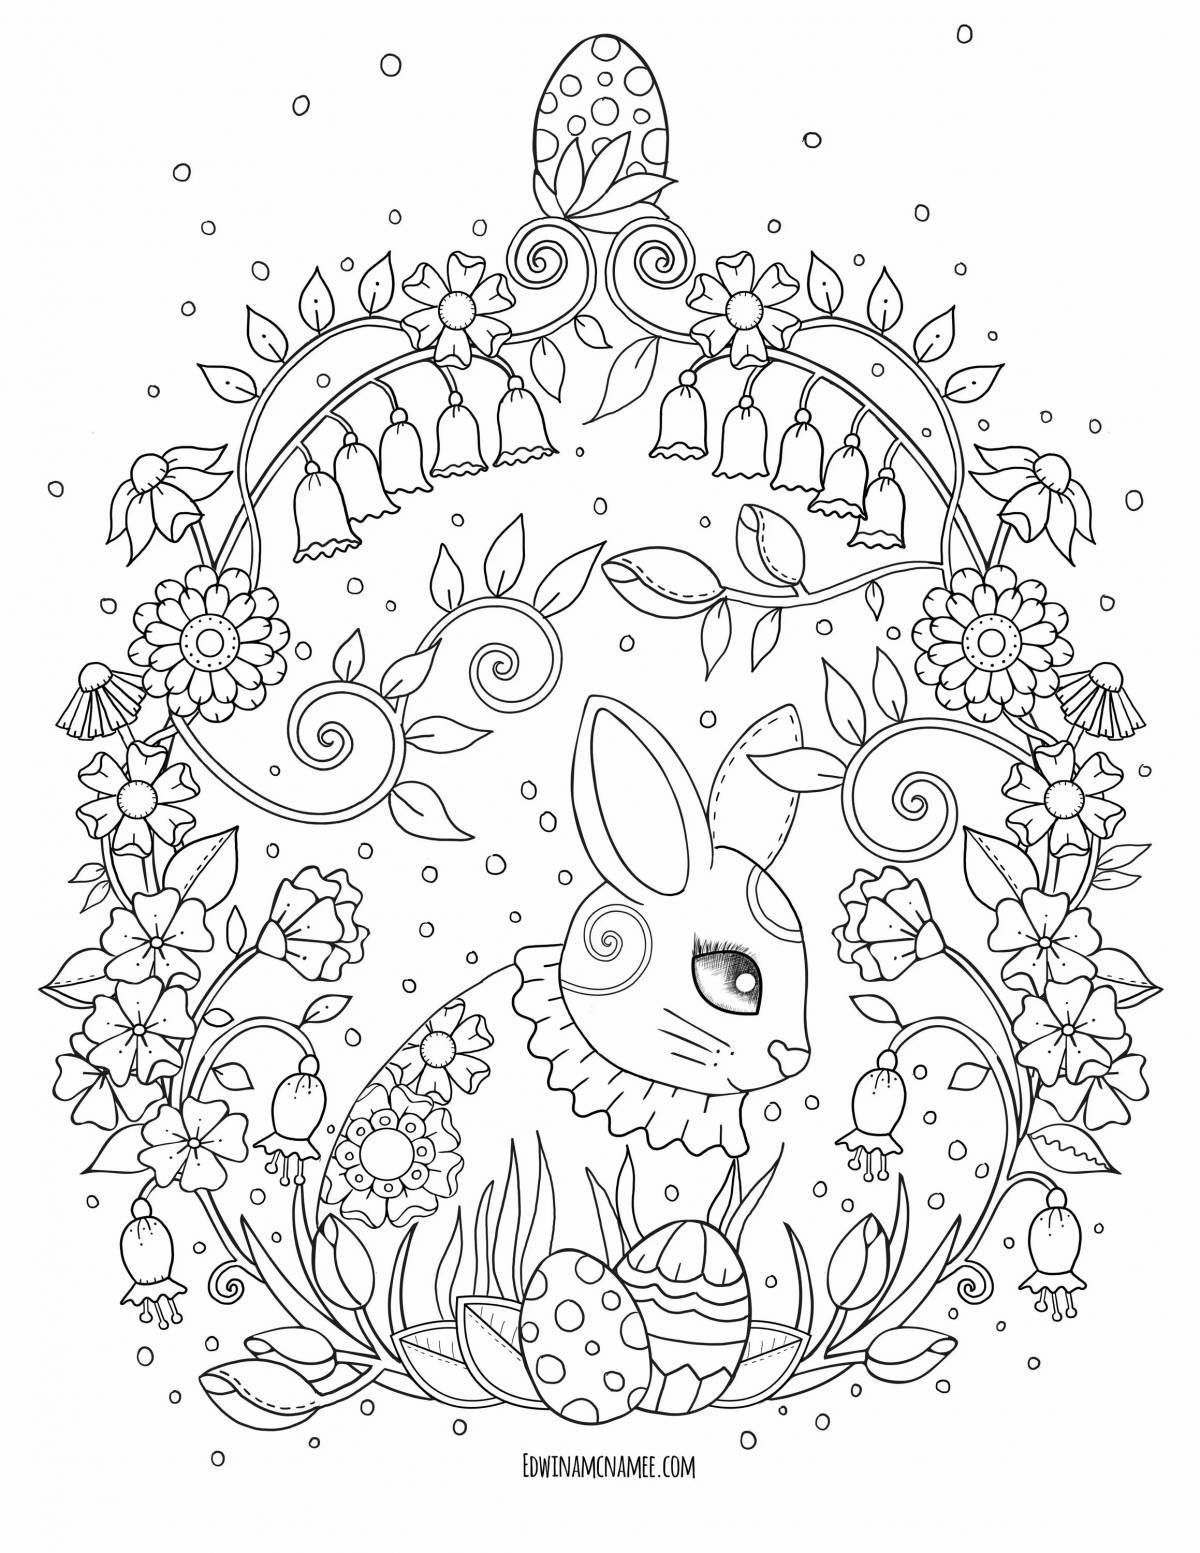 Colorful spring anti-stress coloring book